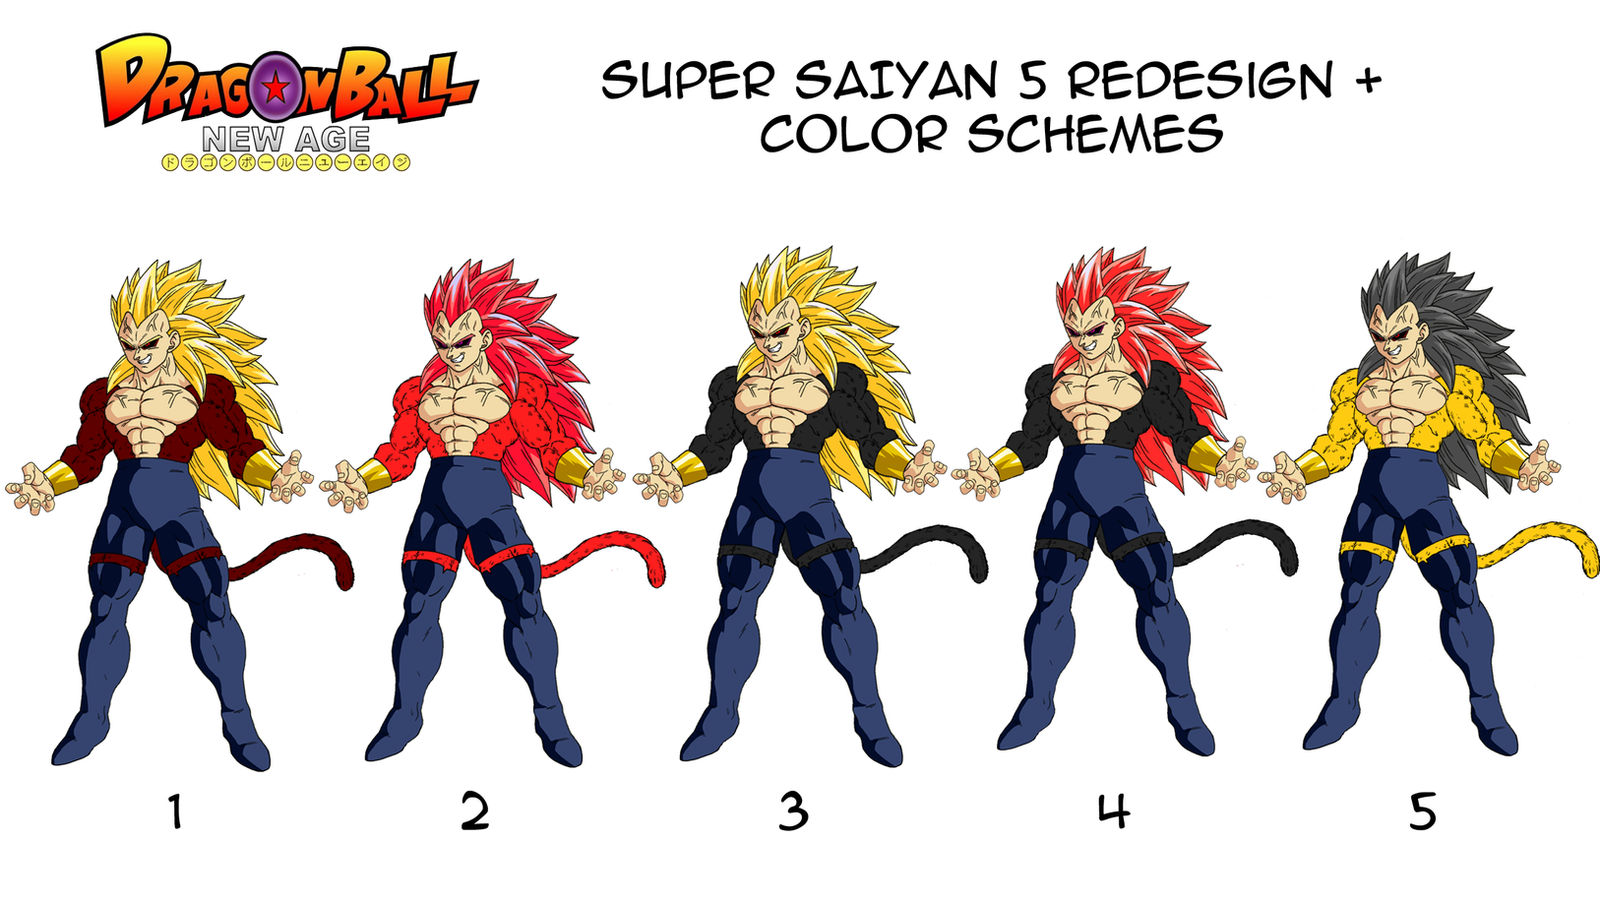 Is THIS The Super Saiyan 5 Multiplier!? 